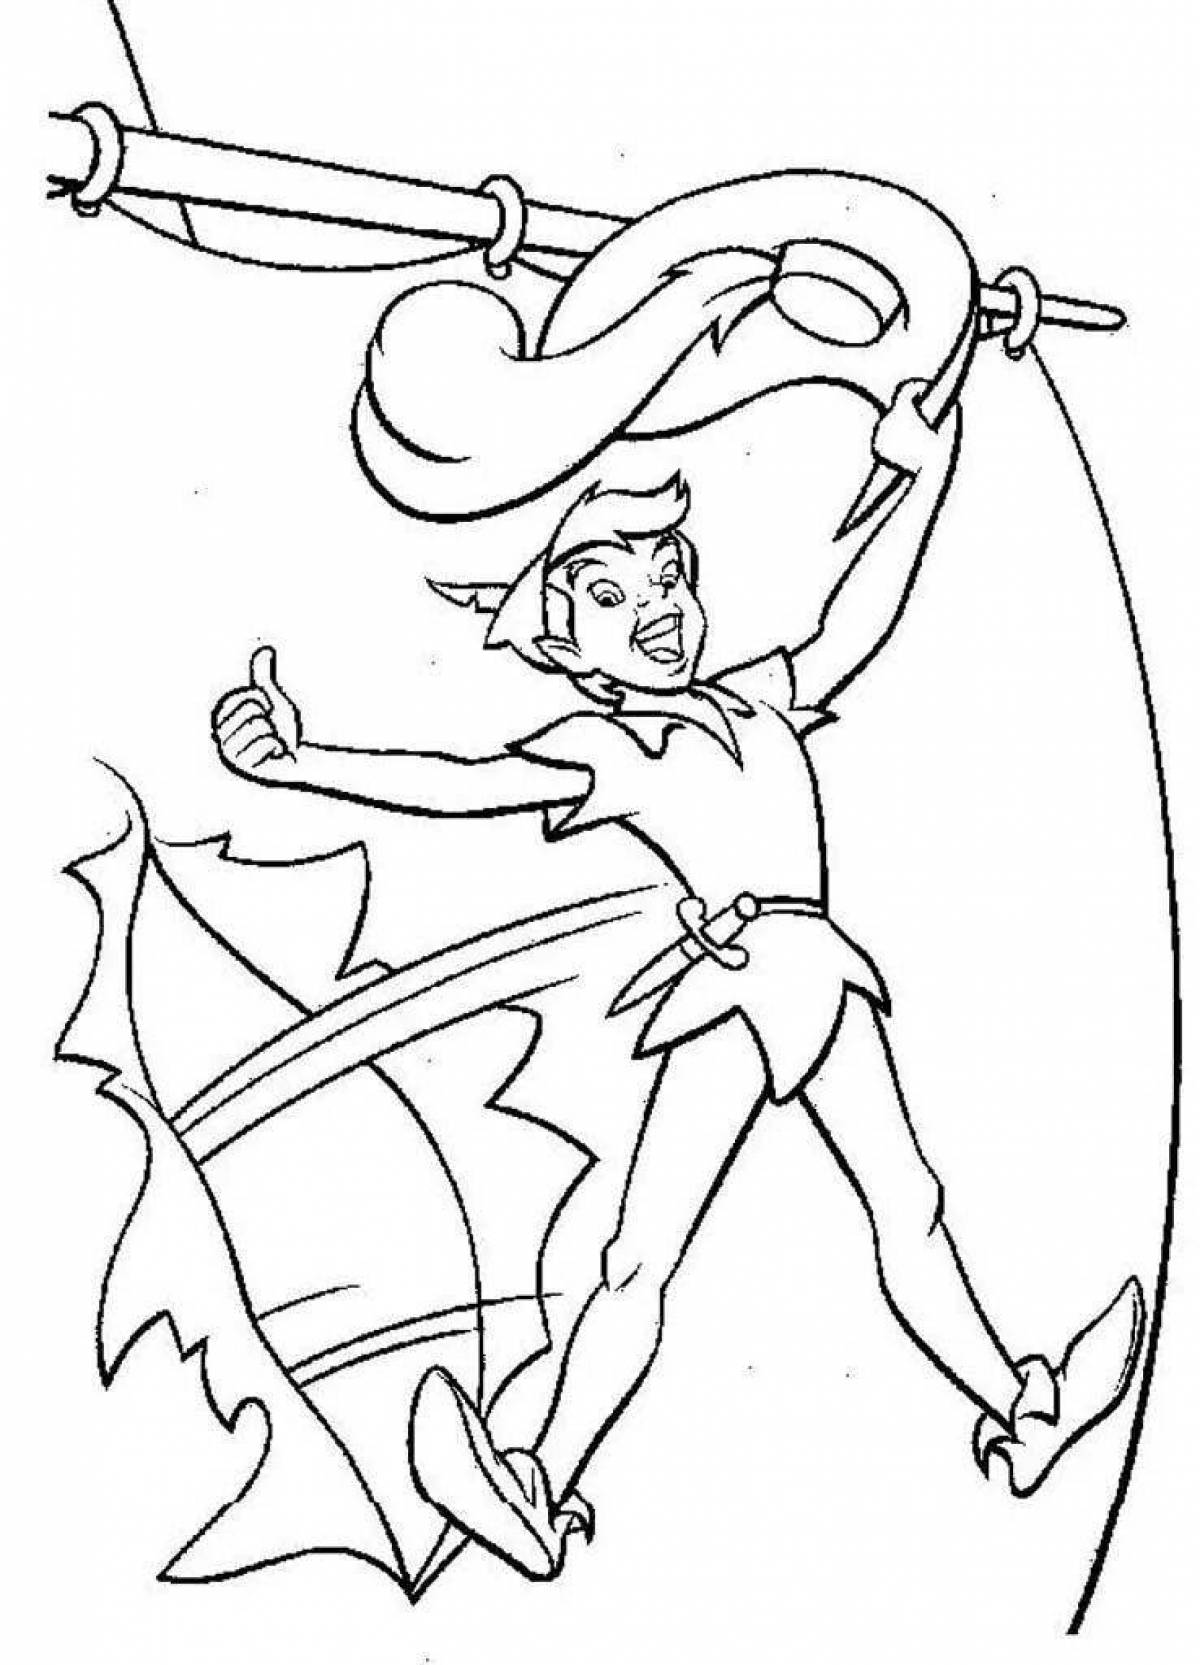 Animated peter pan coloring page